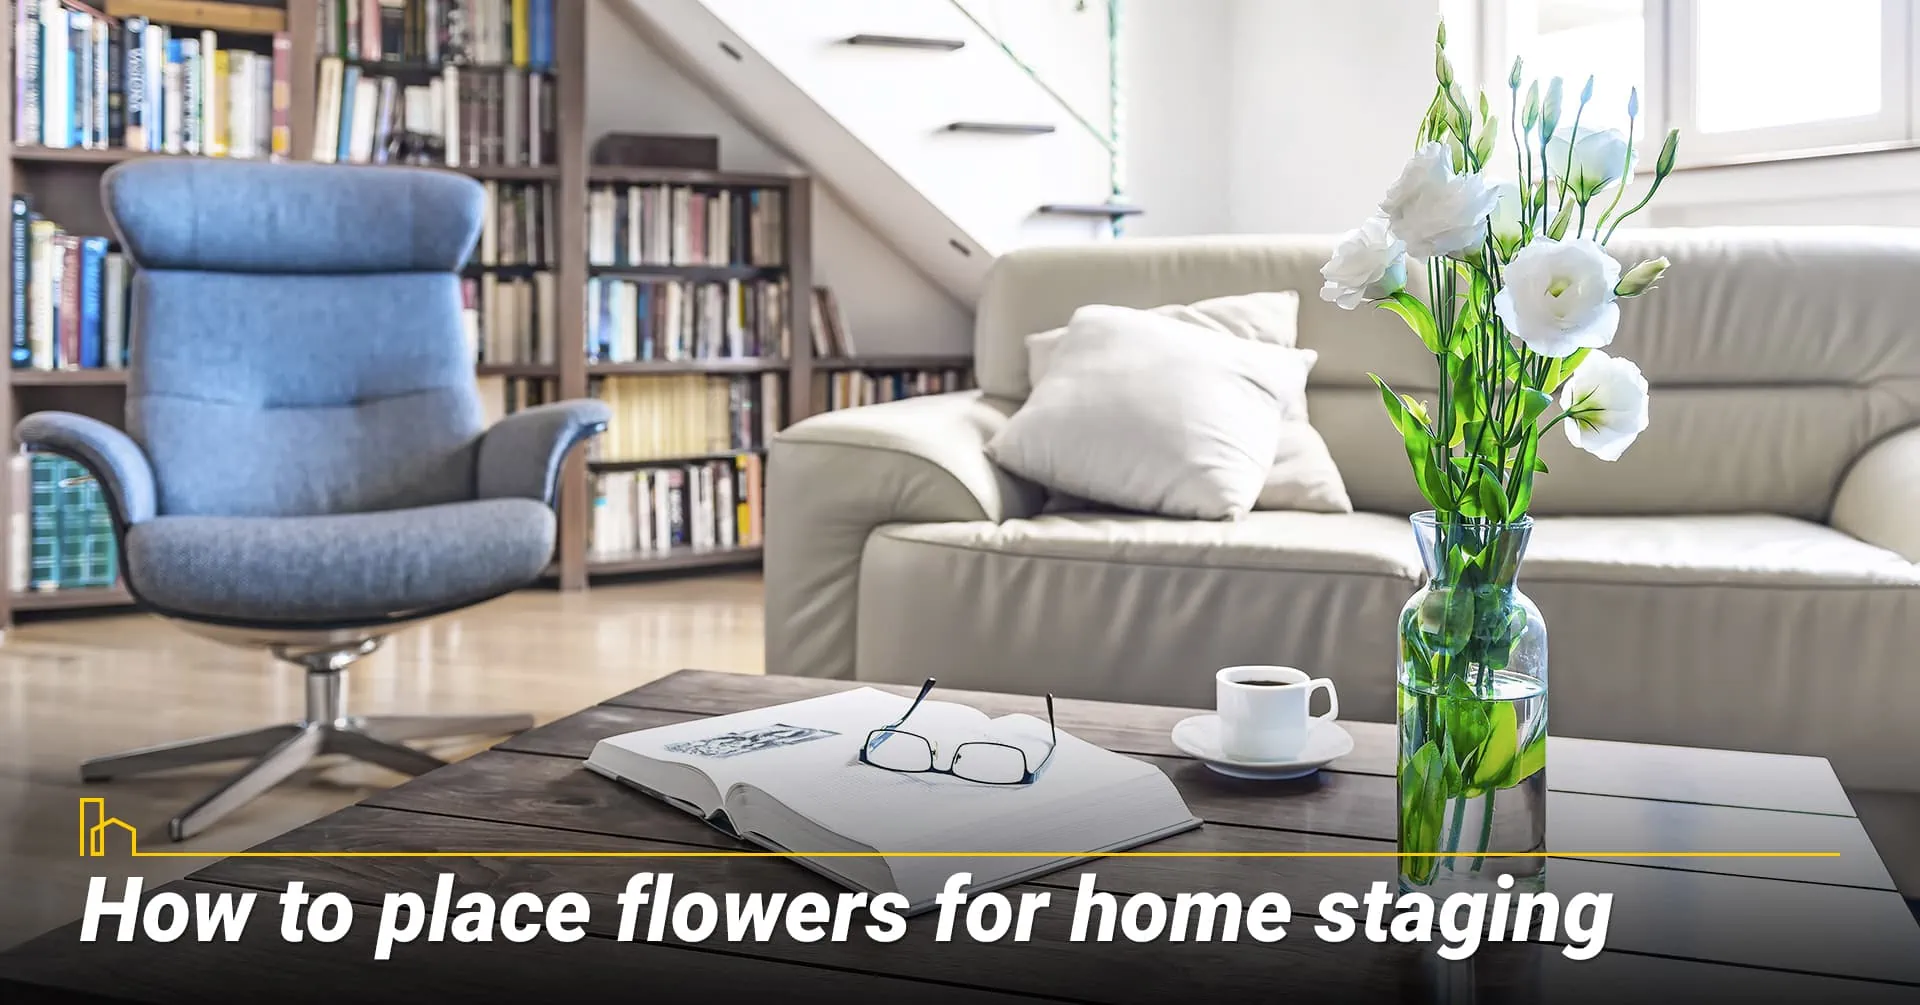 4. How to place flowers for home staging